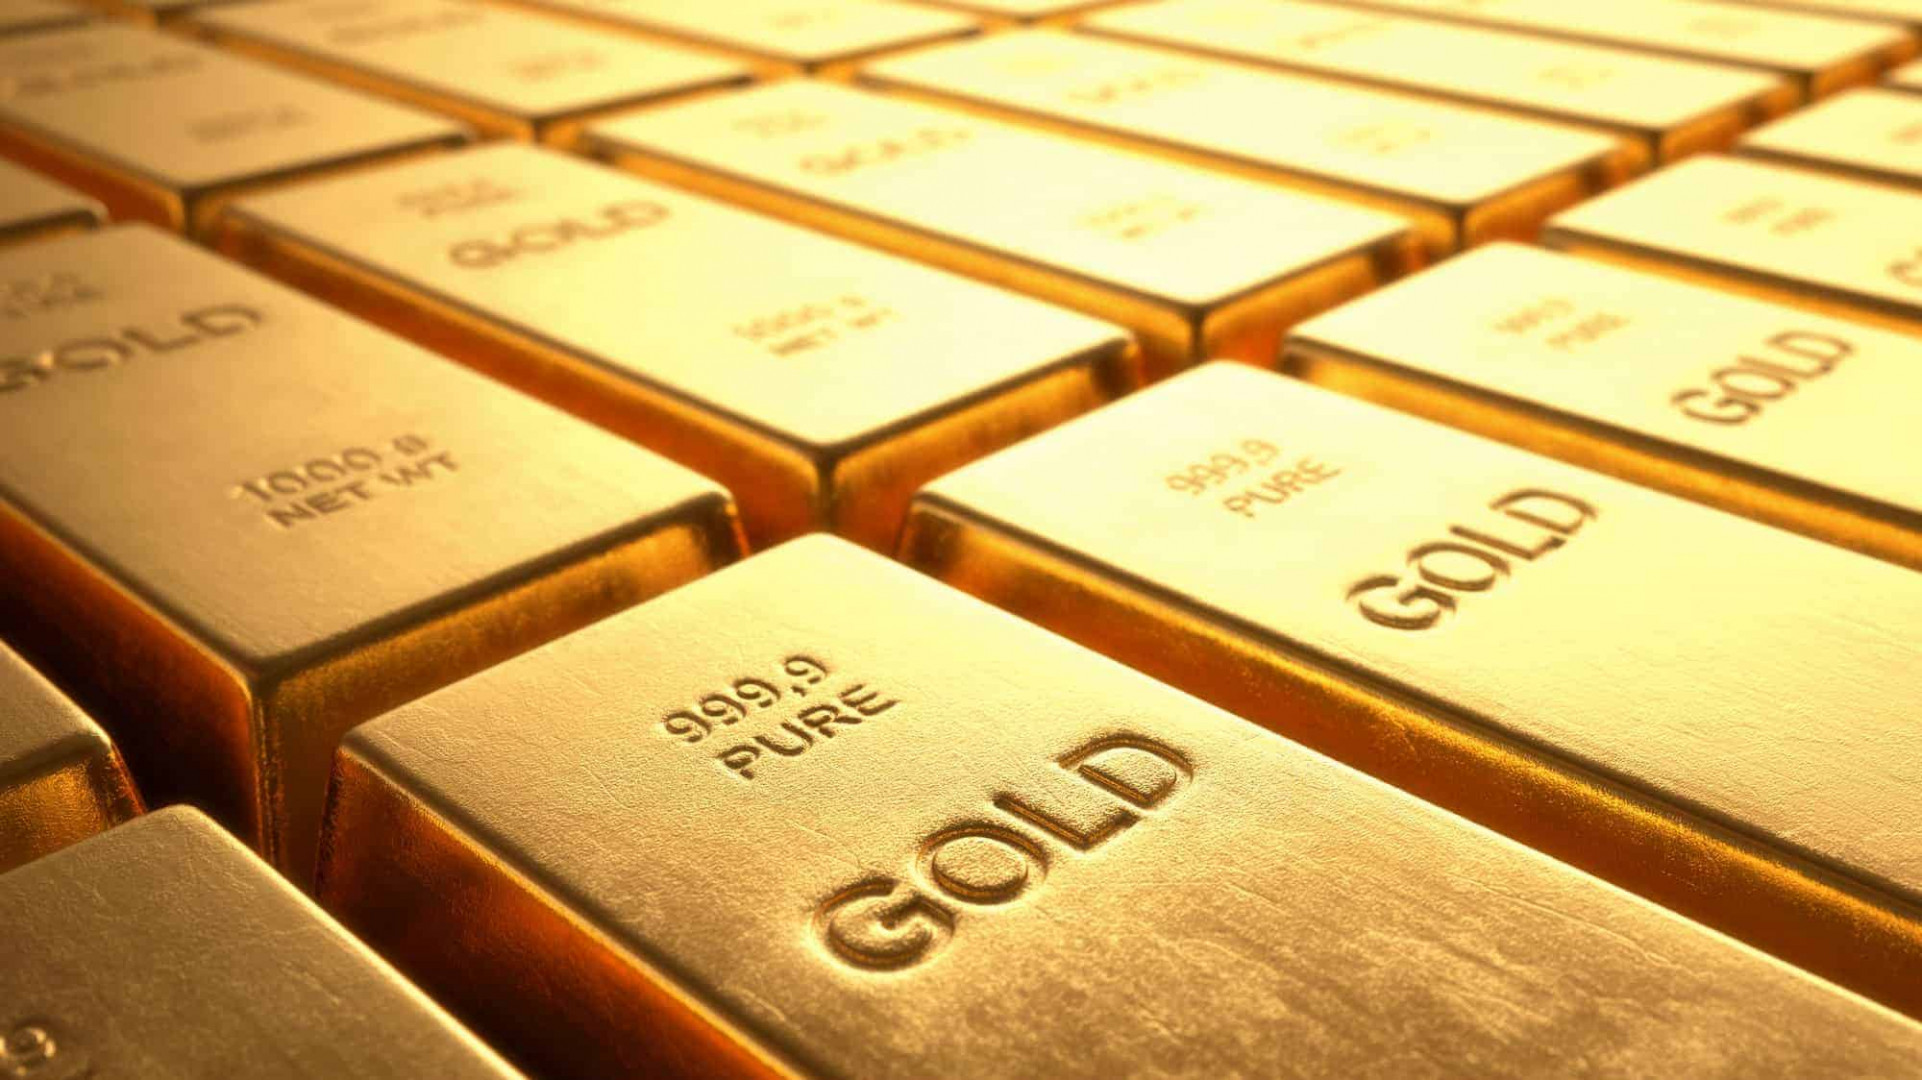 PRECIOUS-Gold prices in check as central banks rev up policy tightening